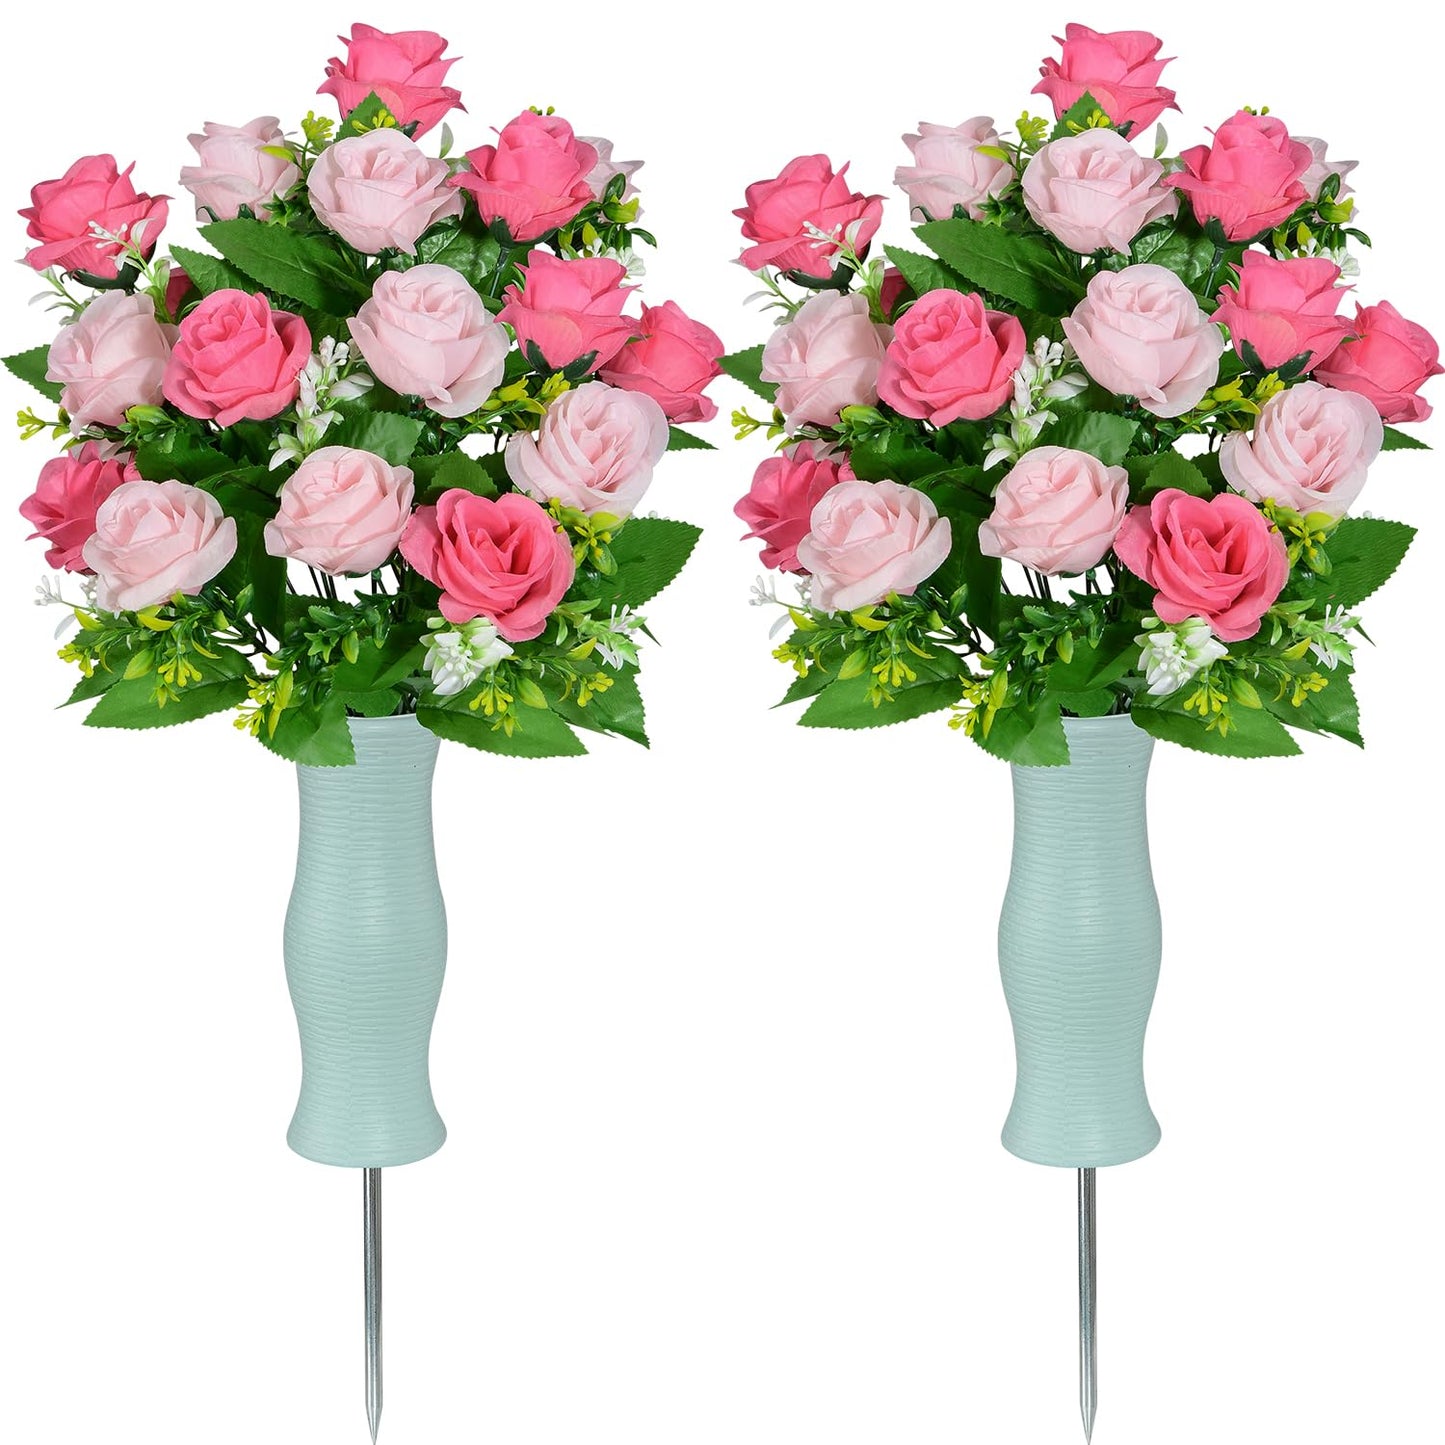 AOFOX Artificial Cemetery Flowers with Vase, Headstone Flowers Rose Bouquet, Graveyard Memorial Flowers for Grave Arrangements Set of 2 (Pink)